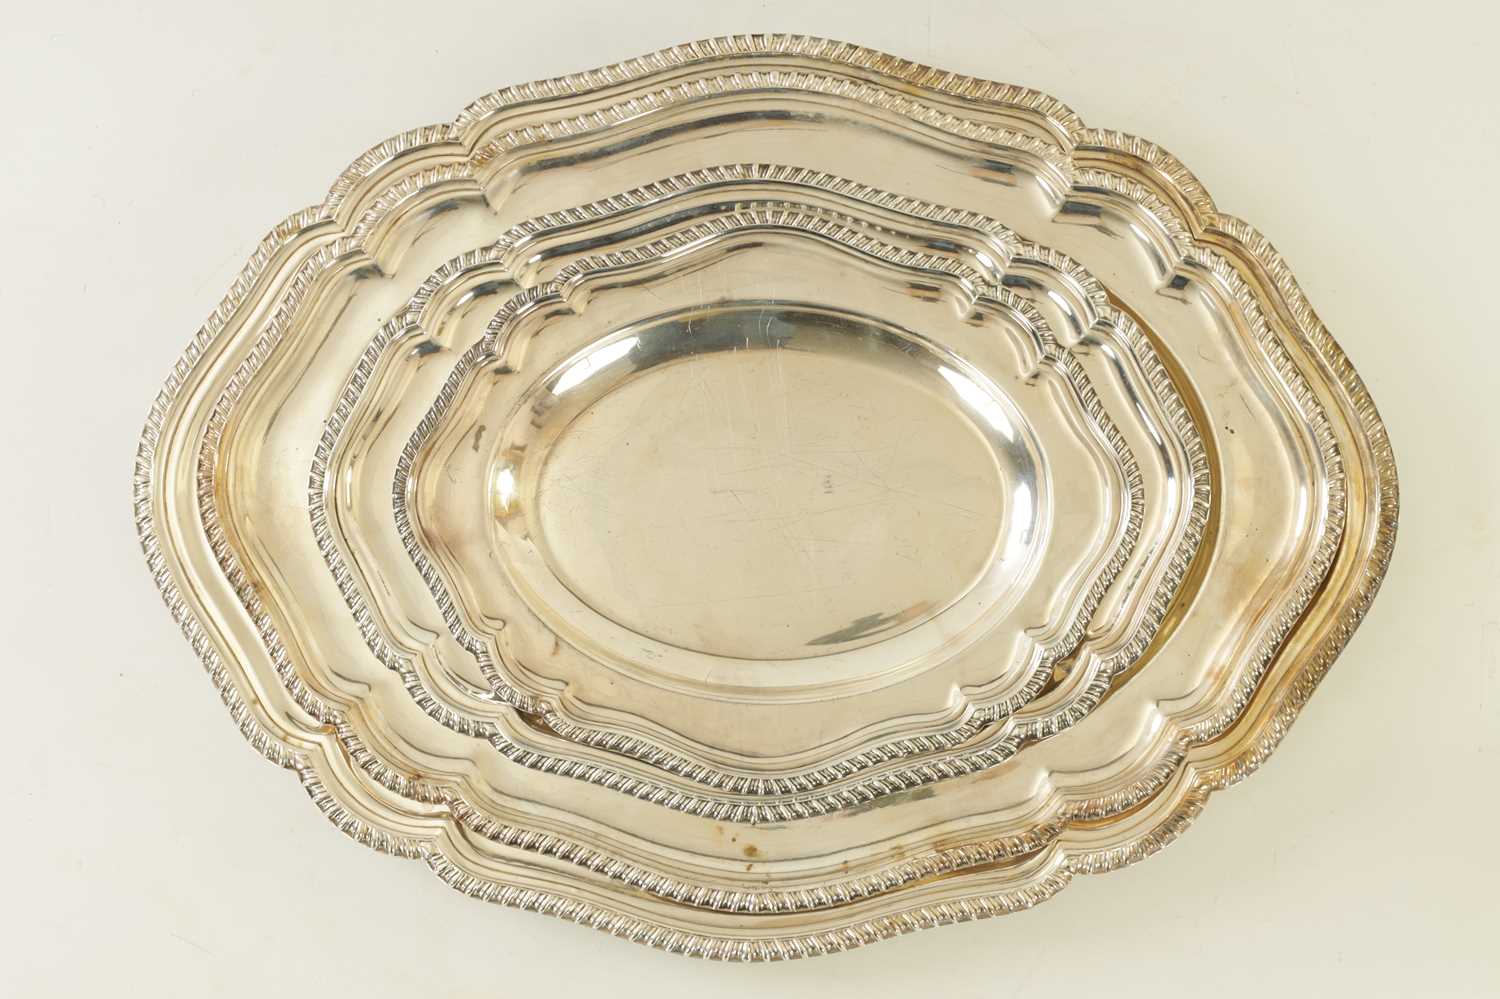 A SET OF FOUR REGENCY SILVER PLATE SCALLOP-EDGE OVAL SERVING DISHES BY MATTHEW BOULTON - Image 2 of 5